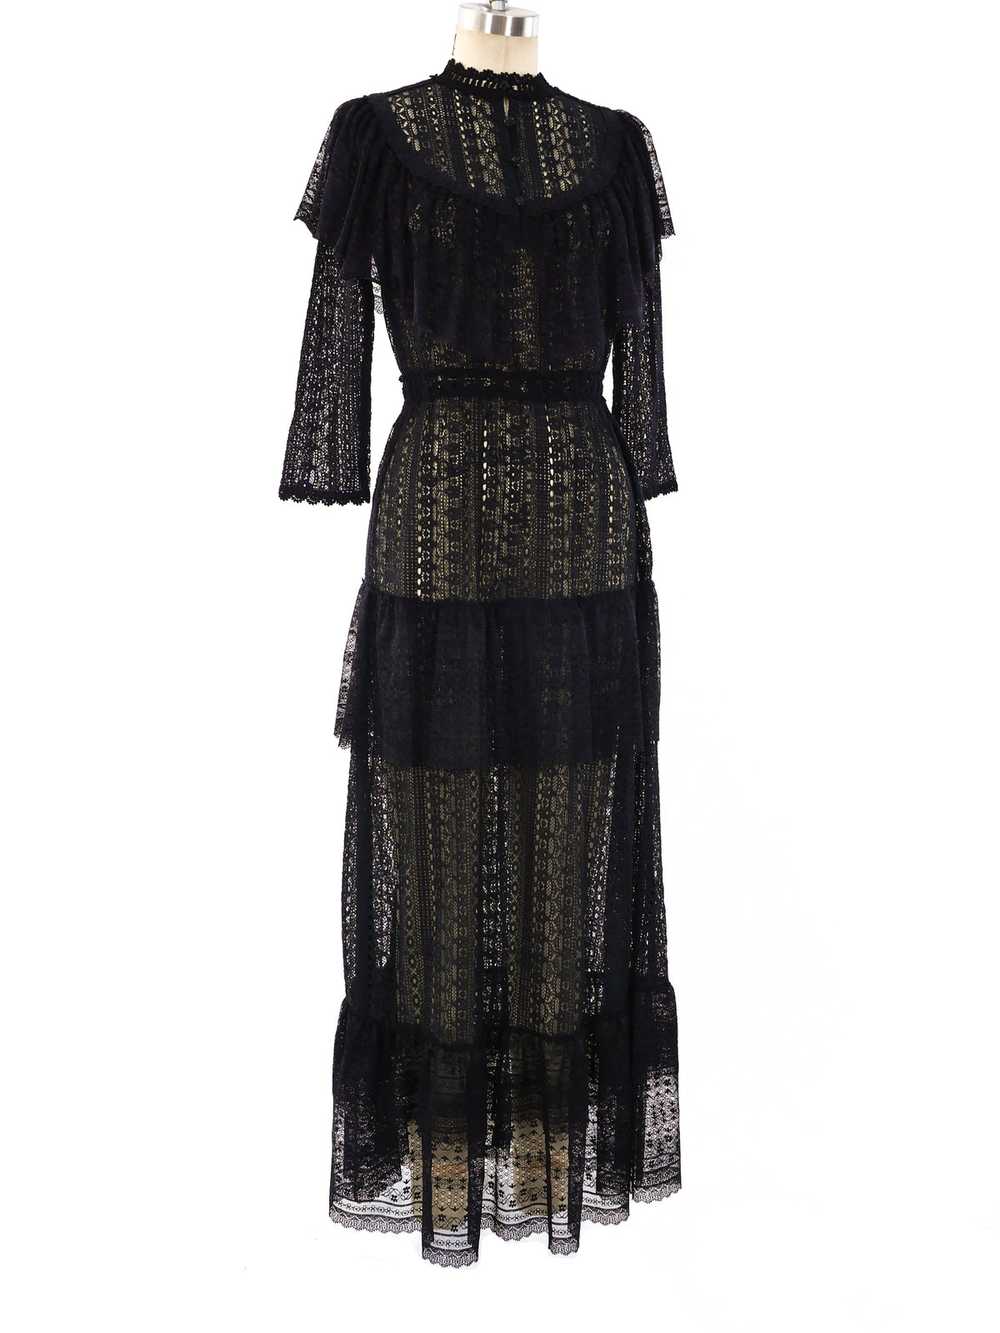 Black Tiered Lace Maxi Dress - image 3